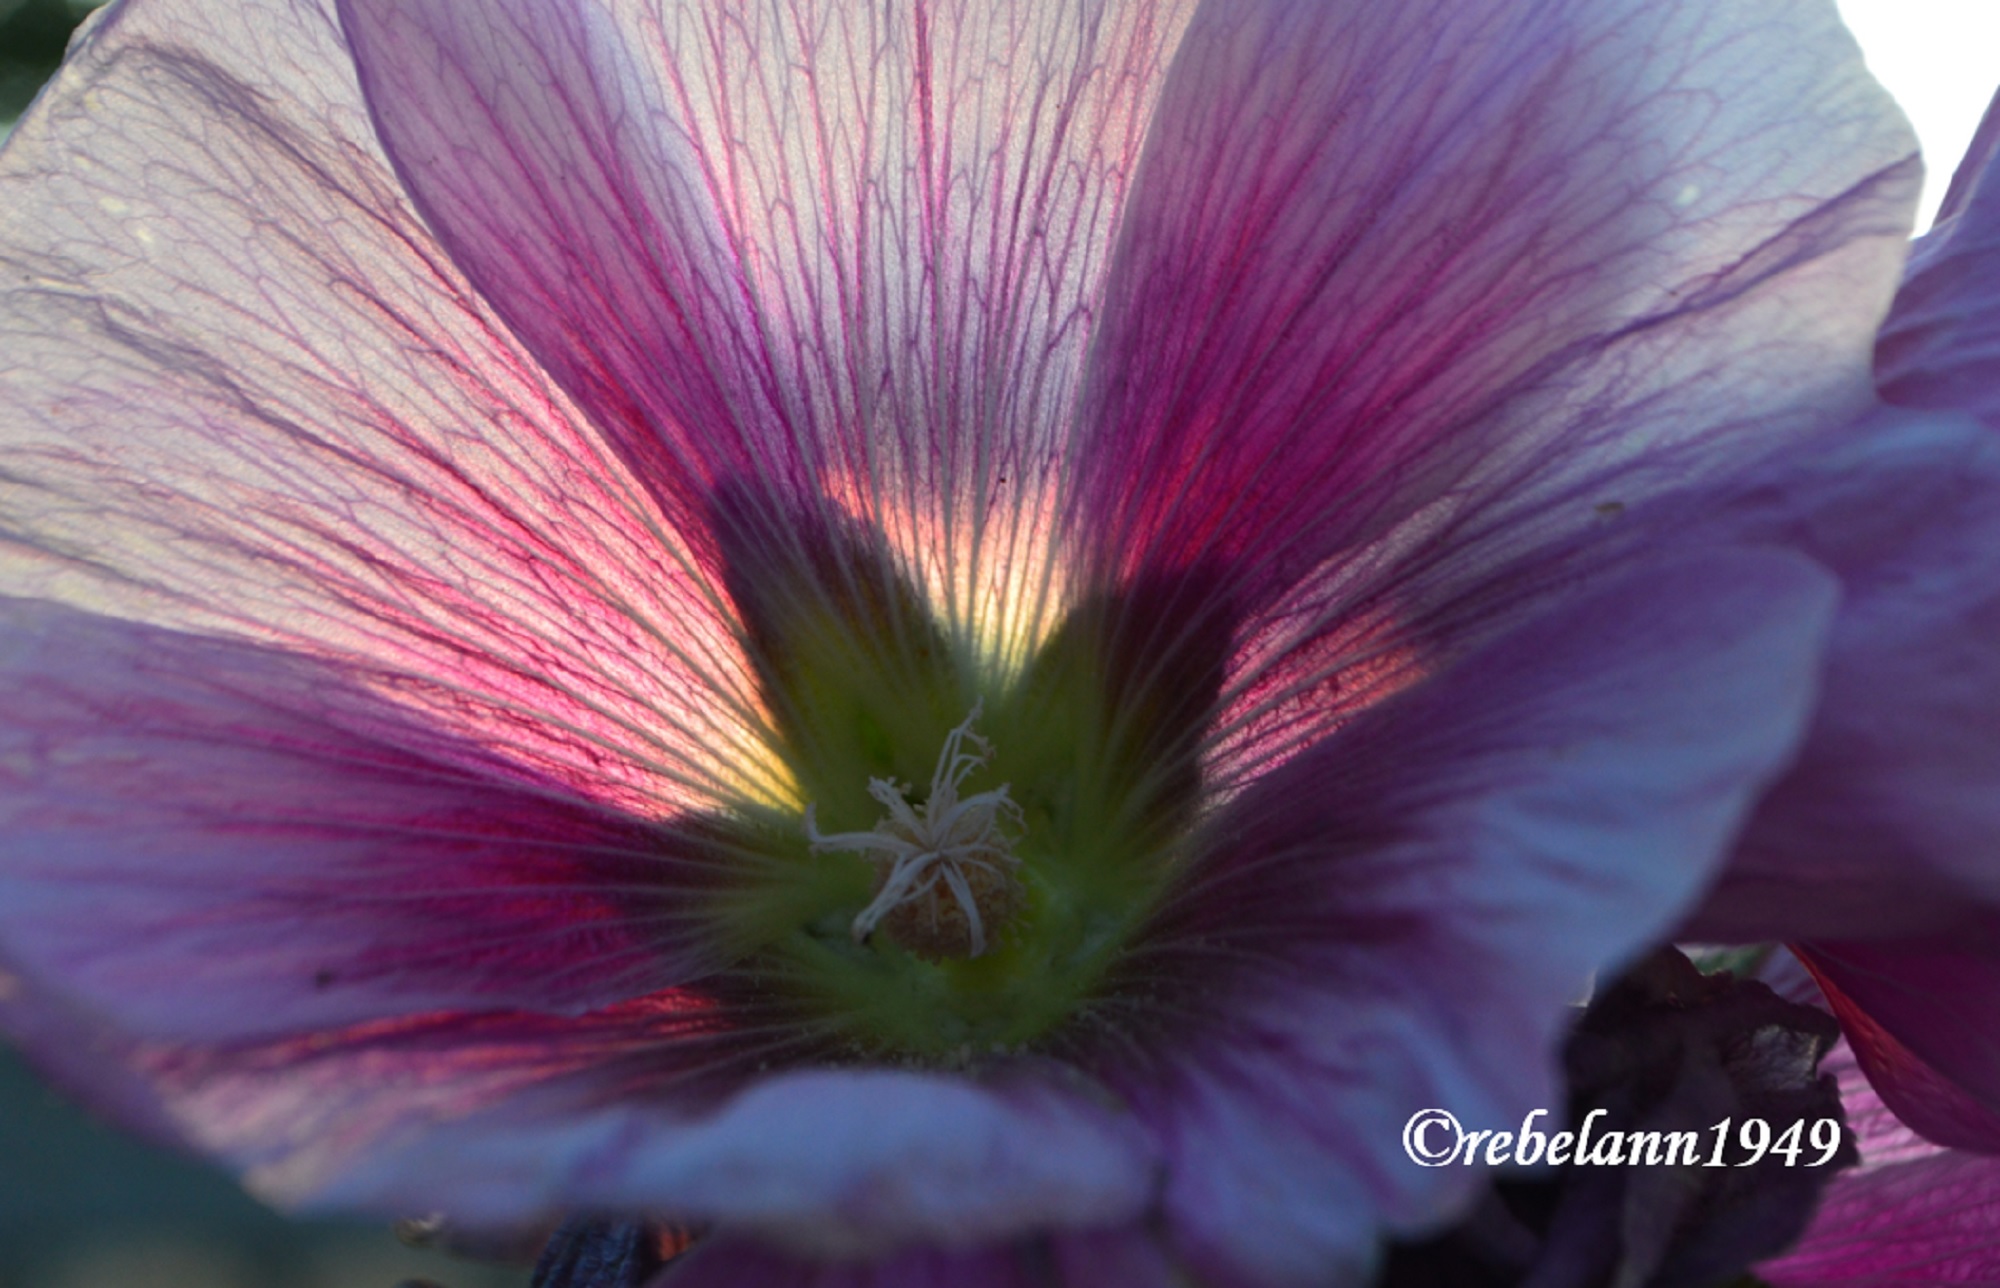 I took this shot this morning at sunrise with the sun behind this hollyhock